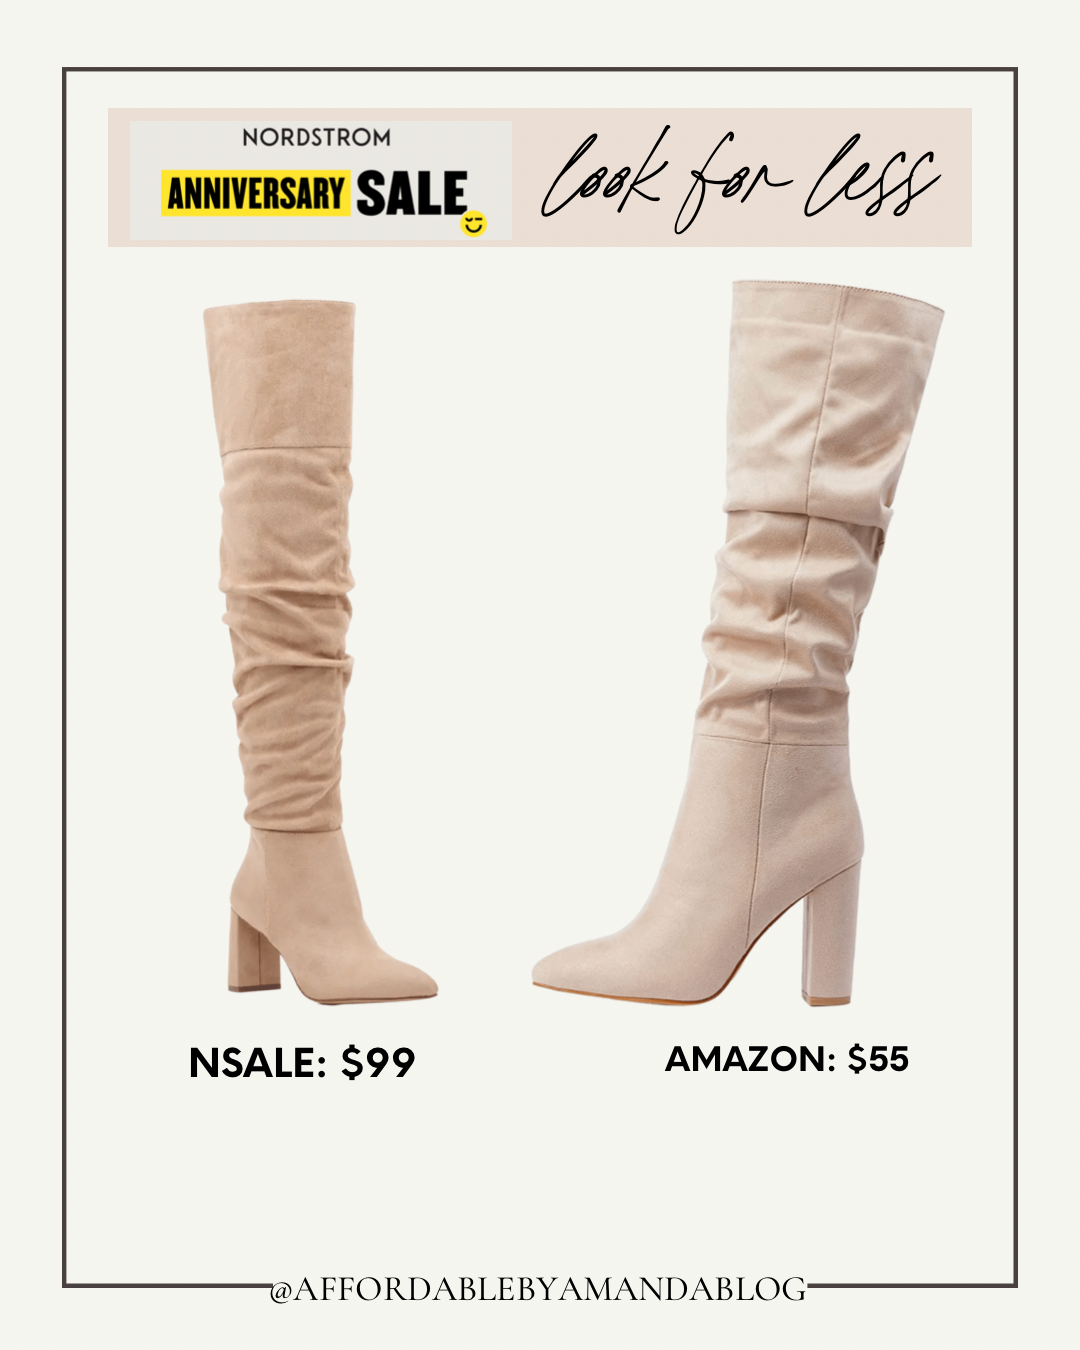 Knee high boots Nordstrom Anniversary Sale Shoes for Fall 2022 - Nordstrom Anniversary Sale Looks for Less on Amazon | Nordstrom Anniversary Sale 2022 Fall Fashion Finds and Looks from Amazon